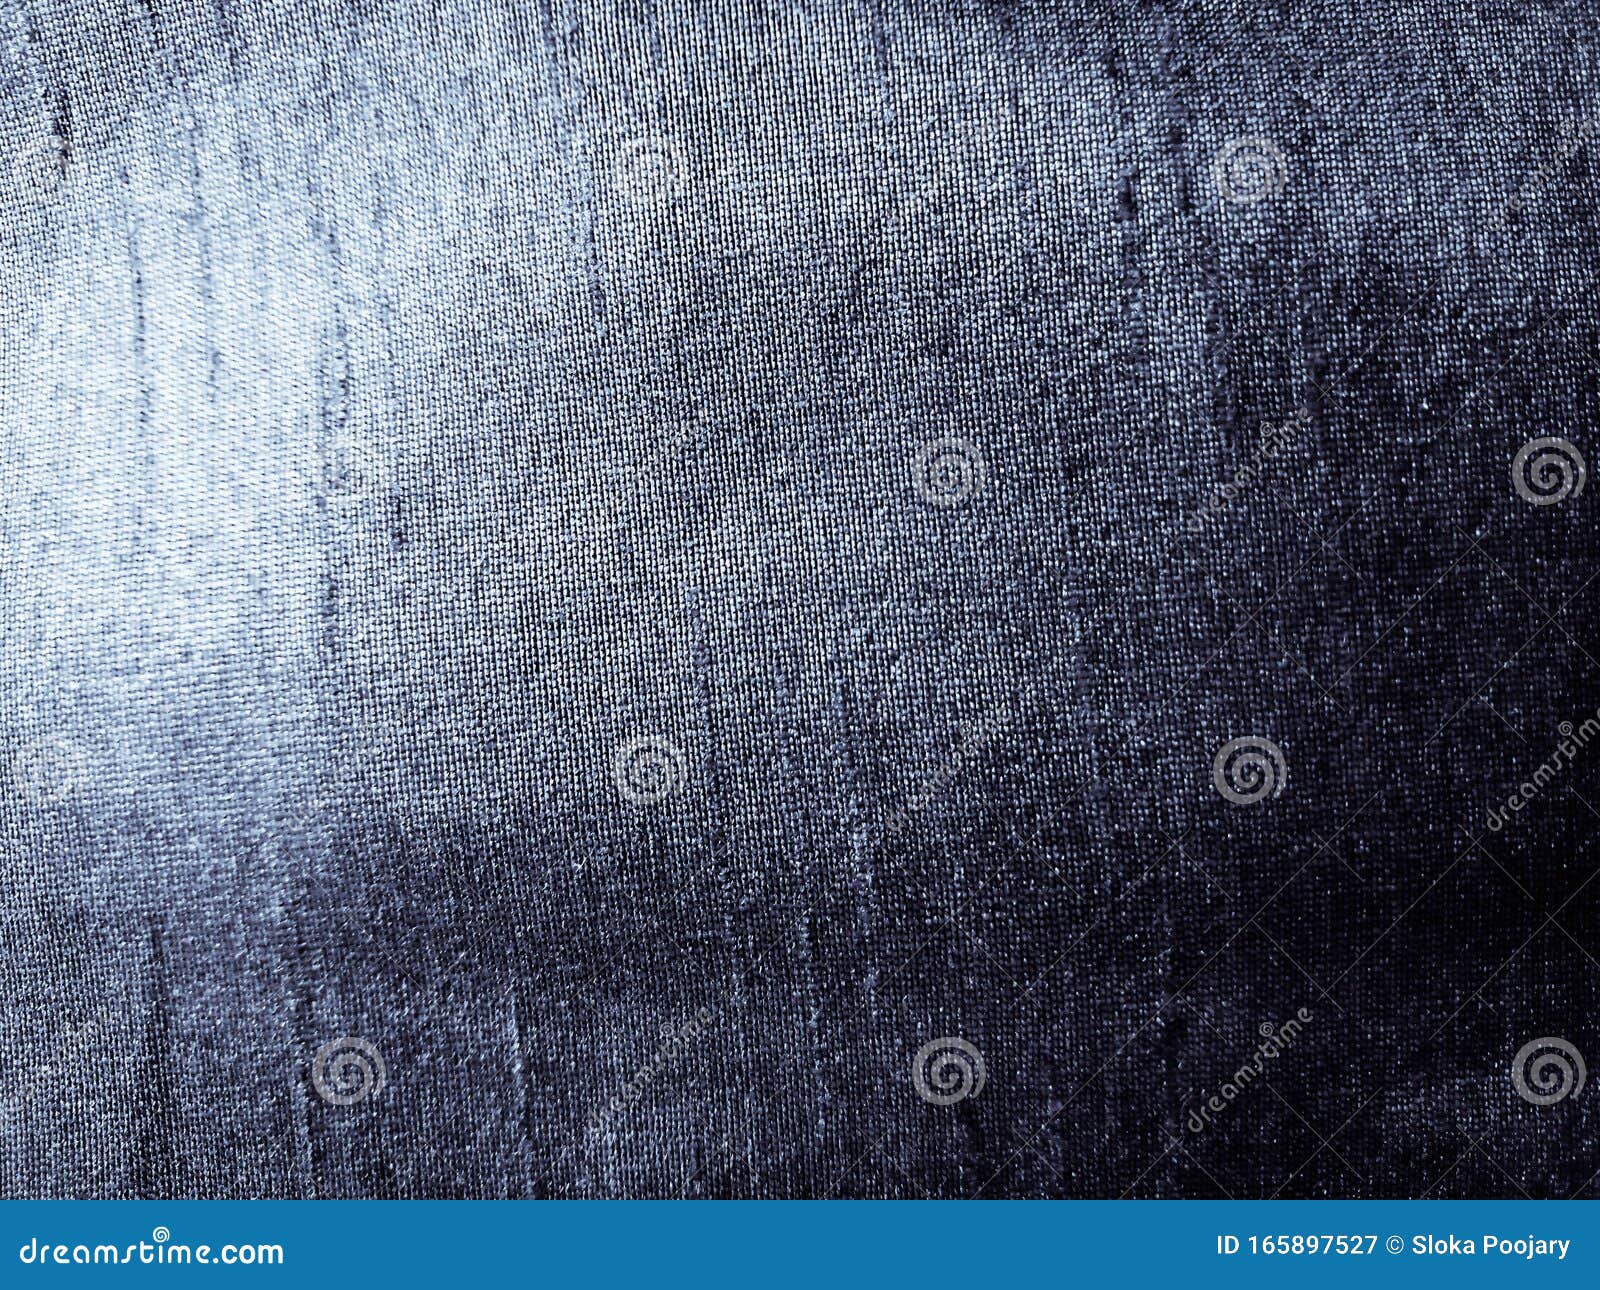 Grey Abstract Shiny Texture Background Stock Image - Image of cement ...